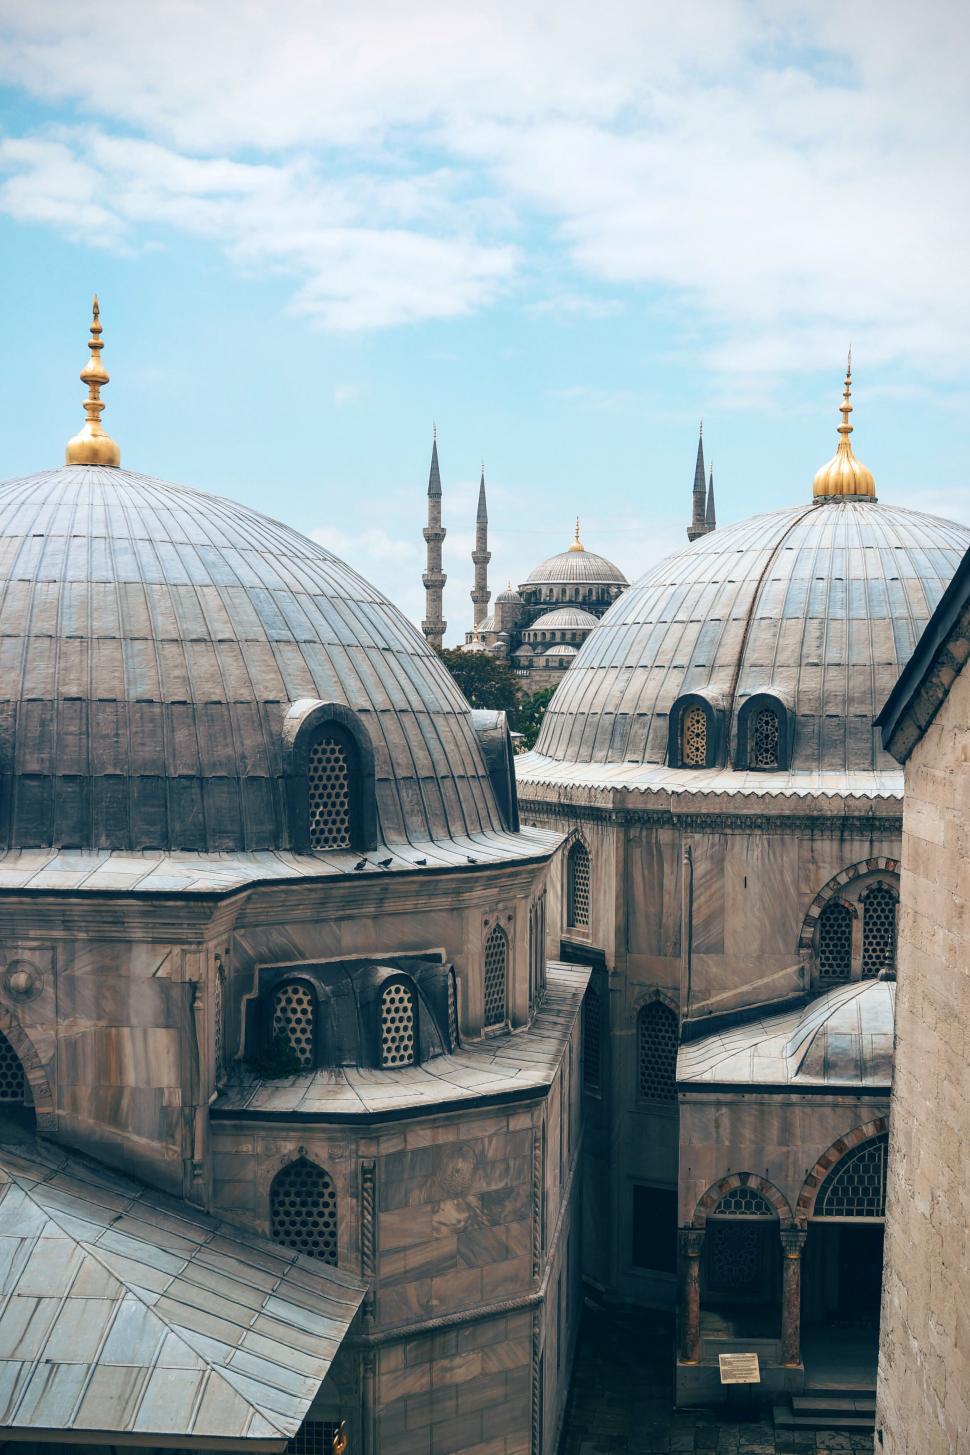 Free Image of Historic domes of a grand mosque in Istanbul 